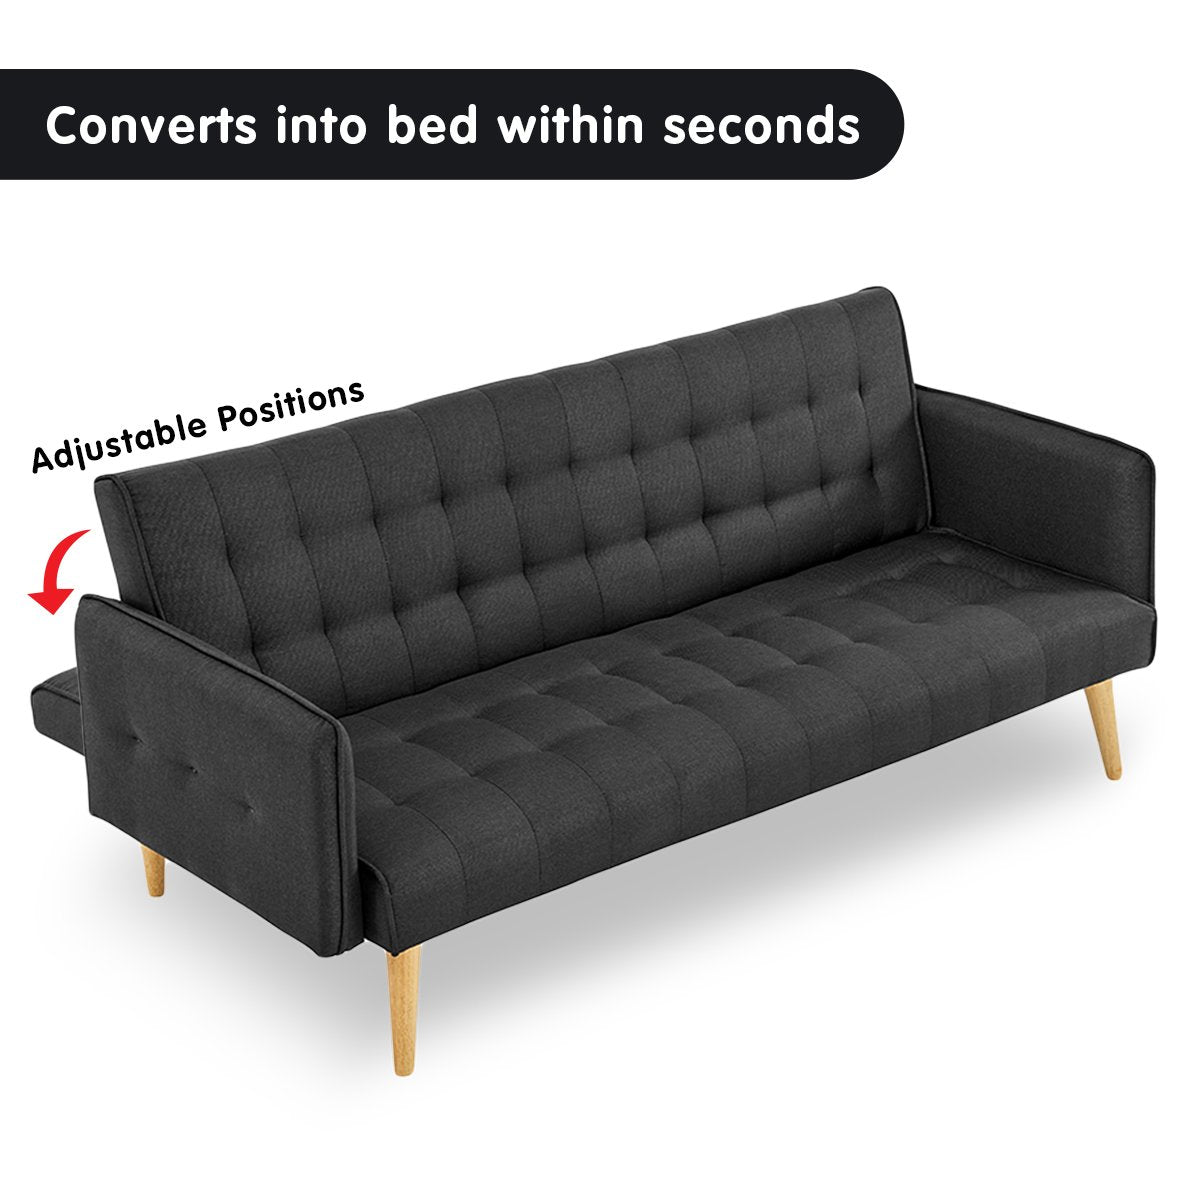 indoor furniture 3 Seater Modular Linen Fabric Sofa Bed Couch - Black